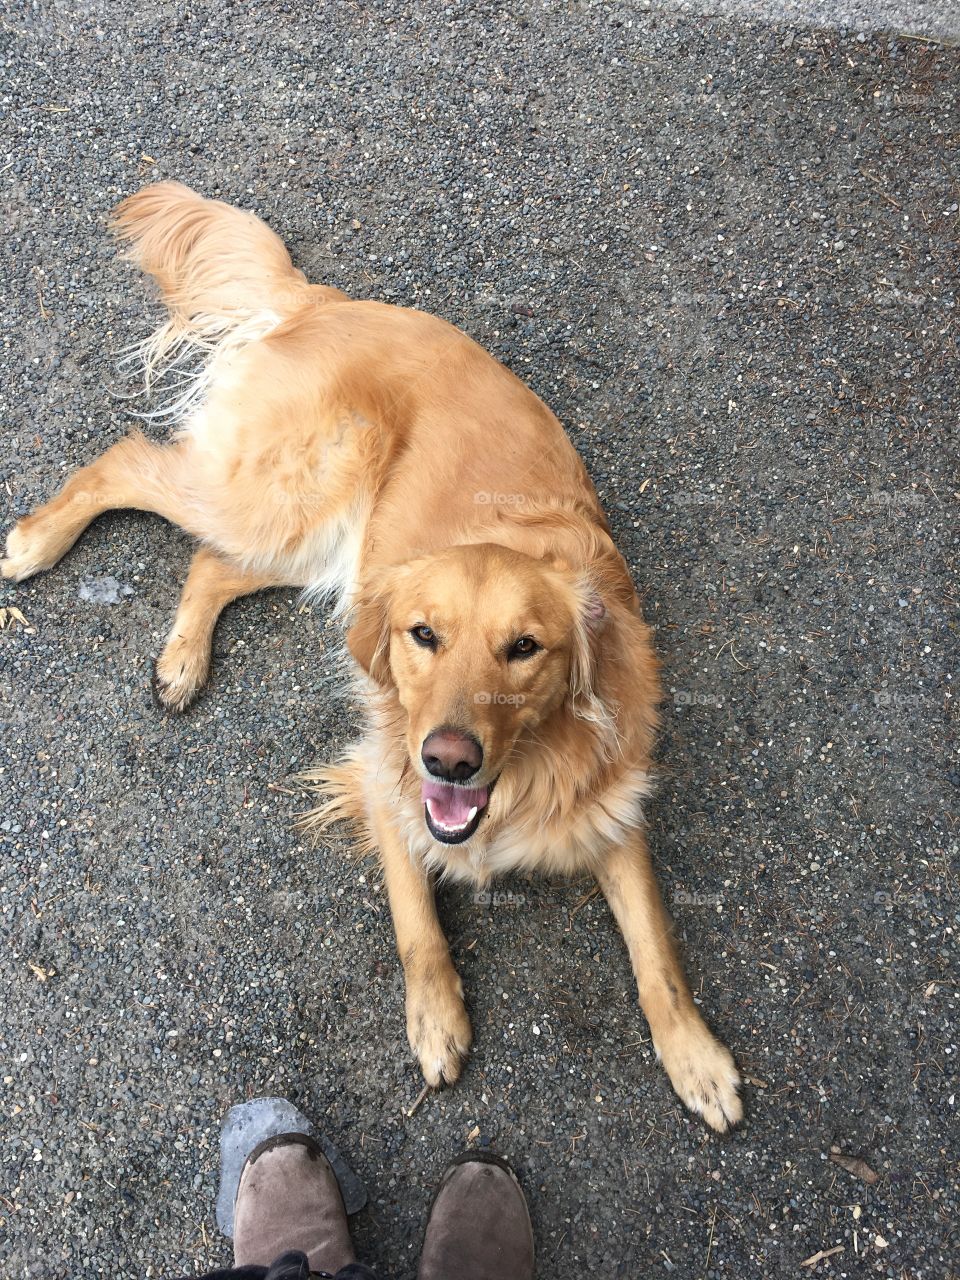 A golden retriever dog laying on the gravel looking up and panting